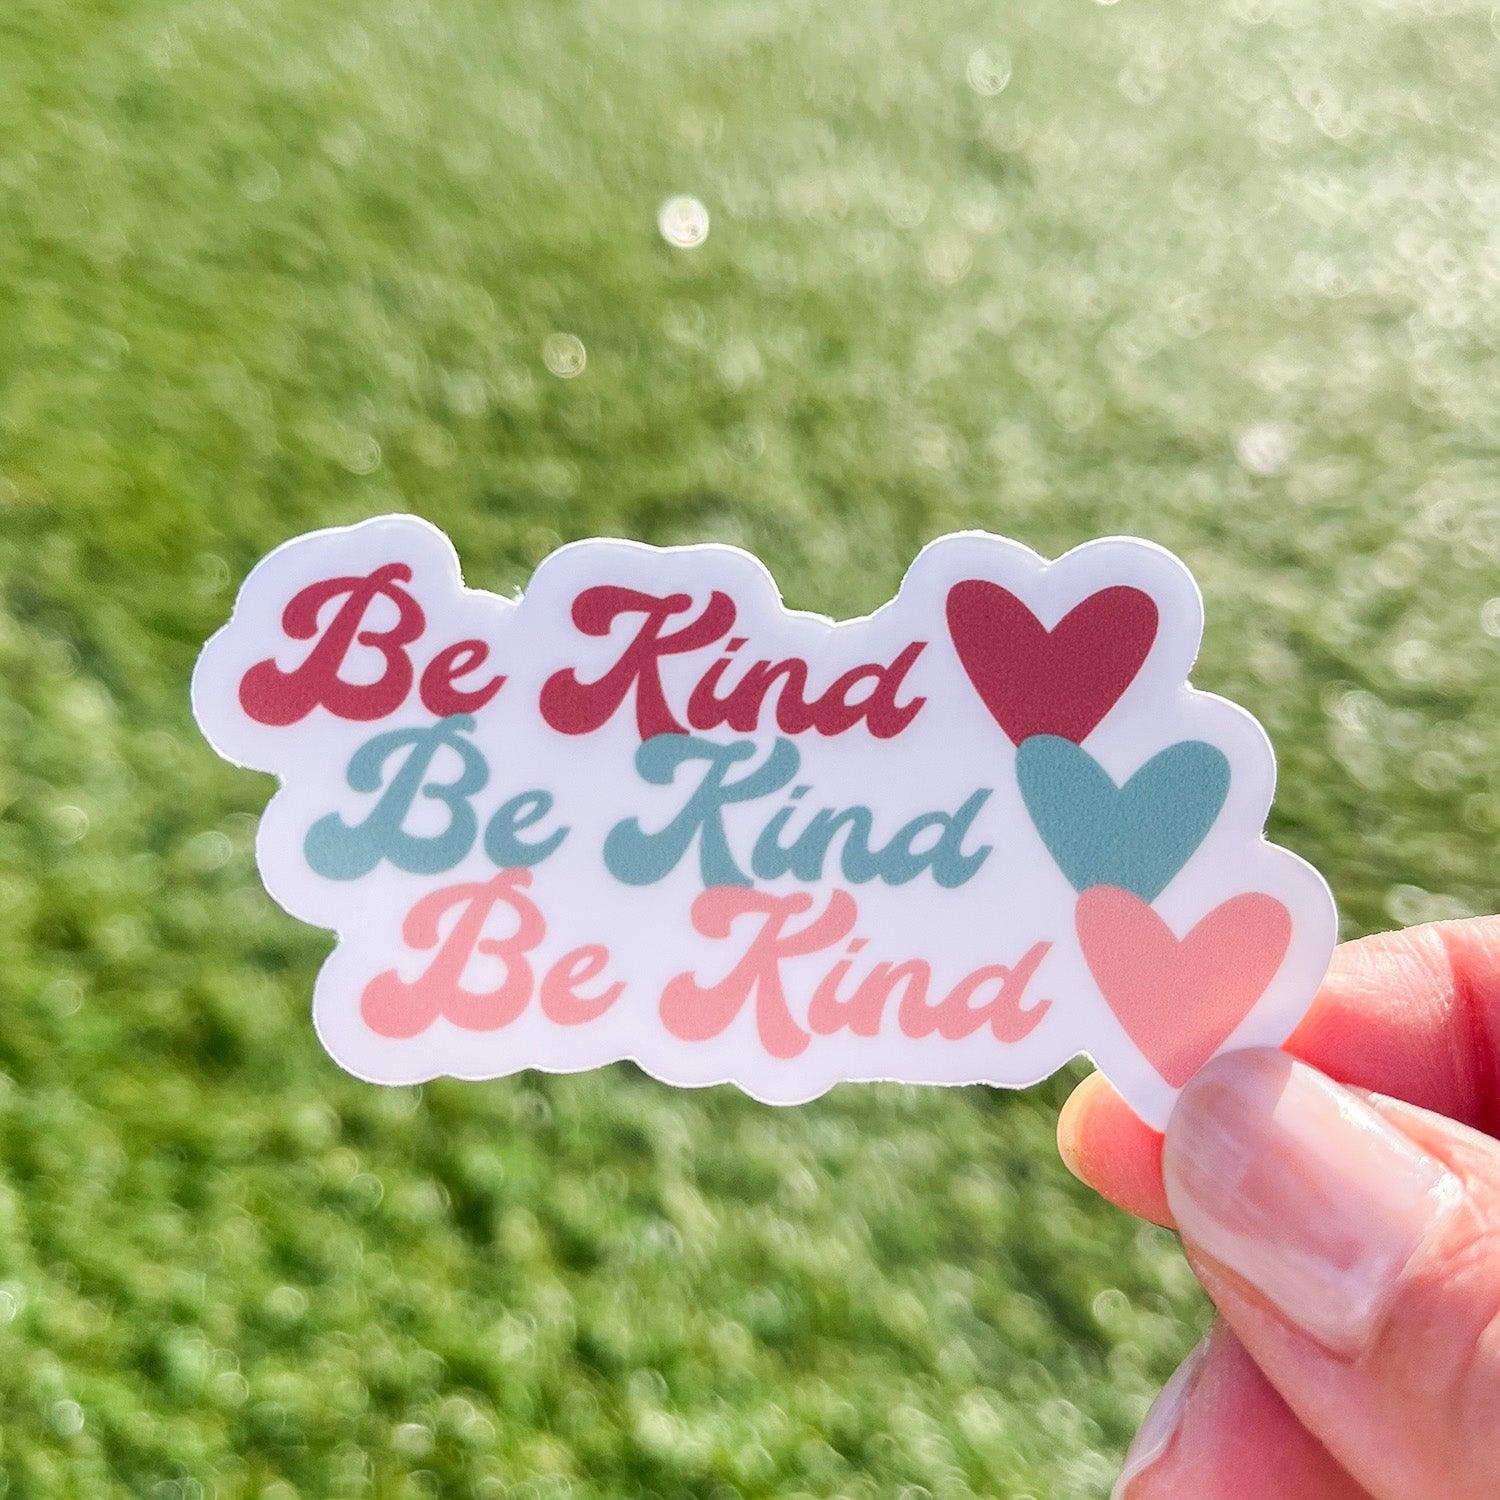 Be Kind sticker with grass and sunshine in the background